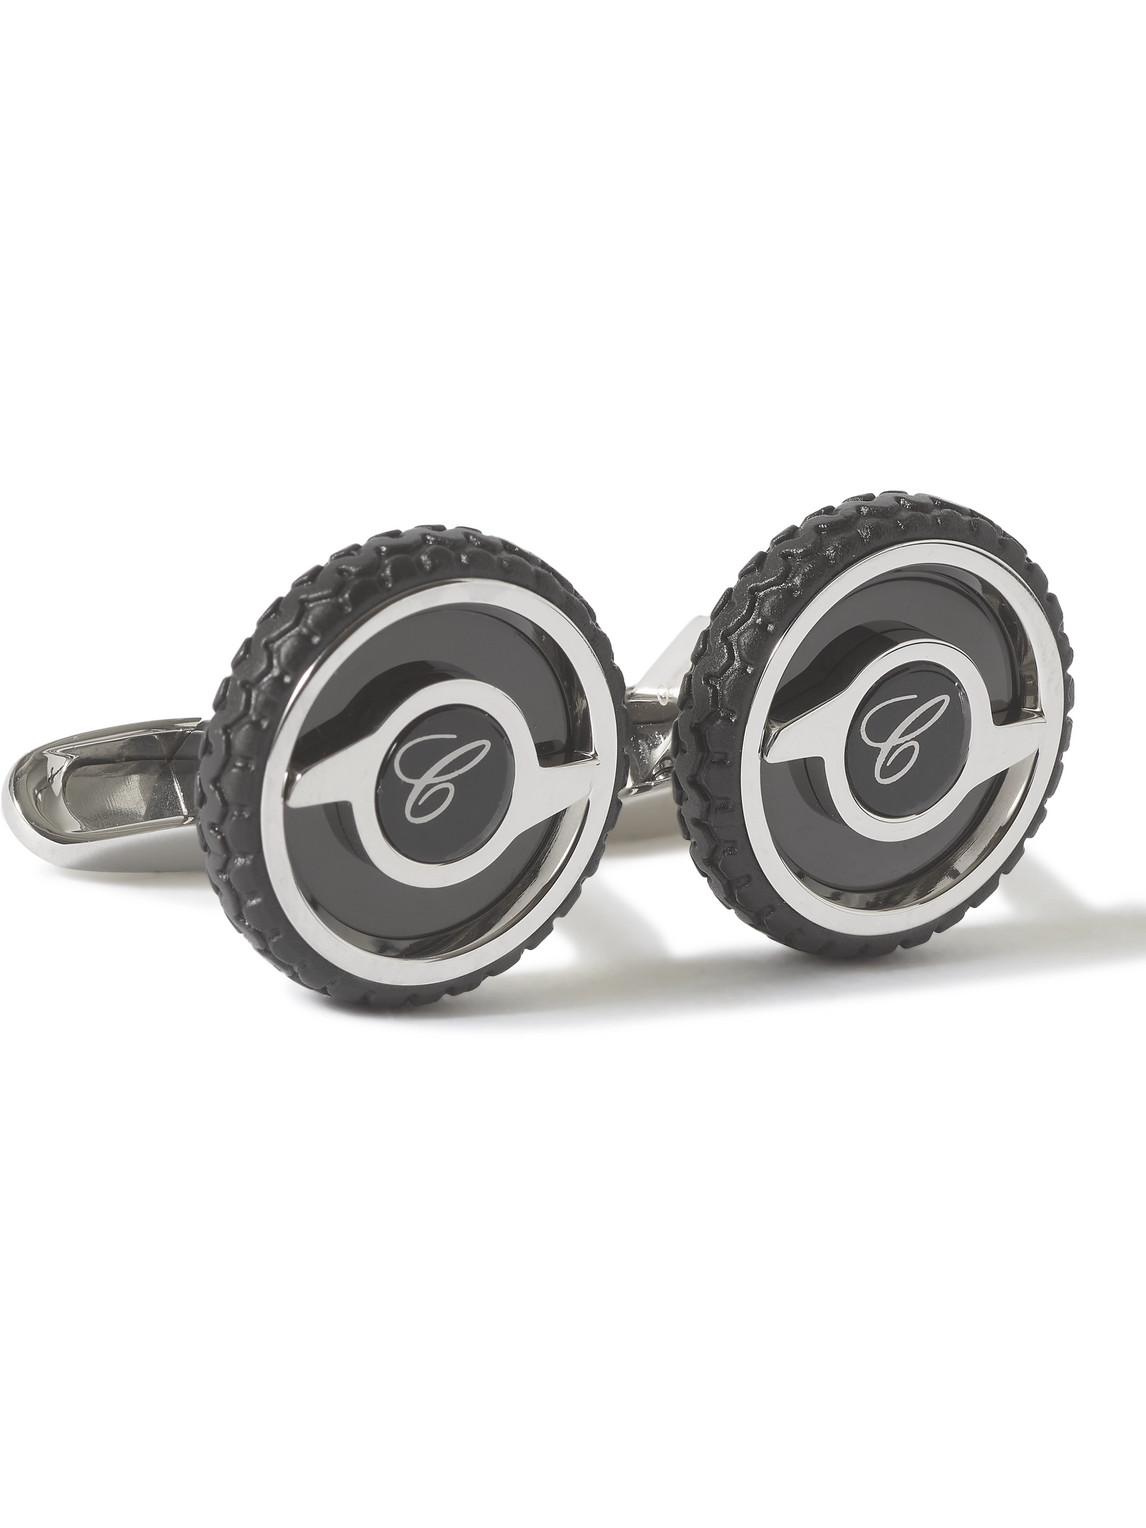 Chopard Mille Miglia Engraved Stainless Steel and Rubber Cufflinks